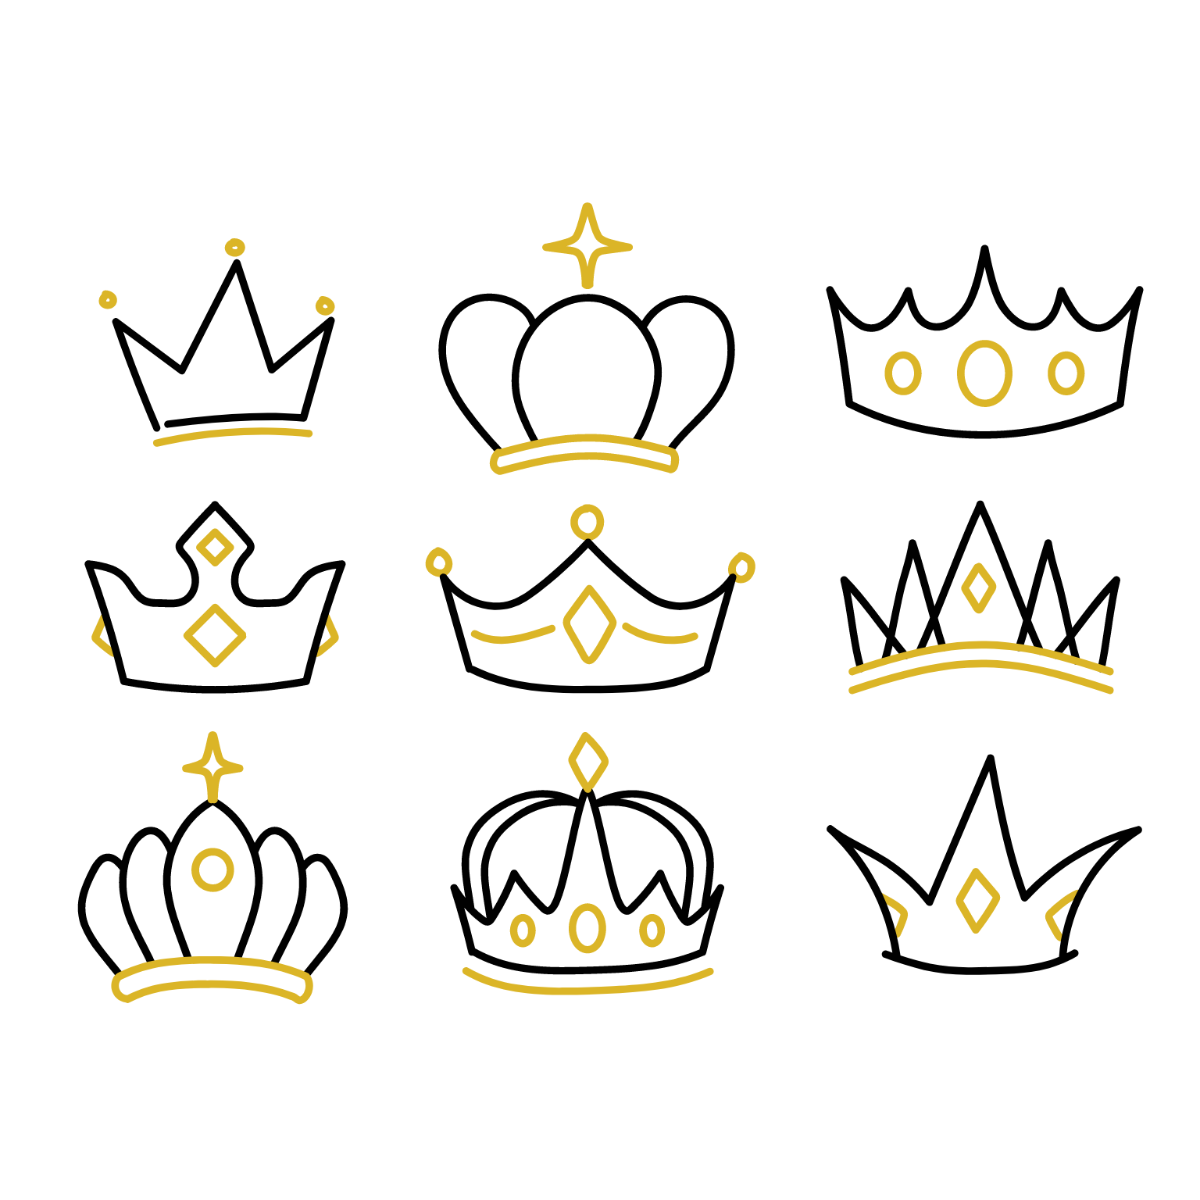 Free Crown Doodle Vector Template